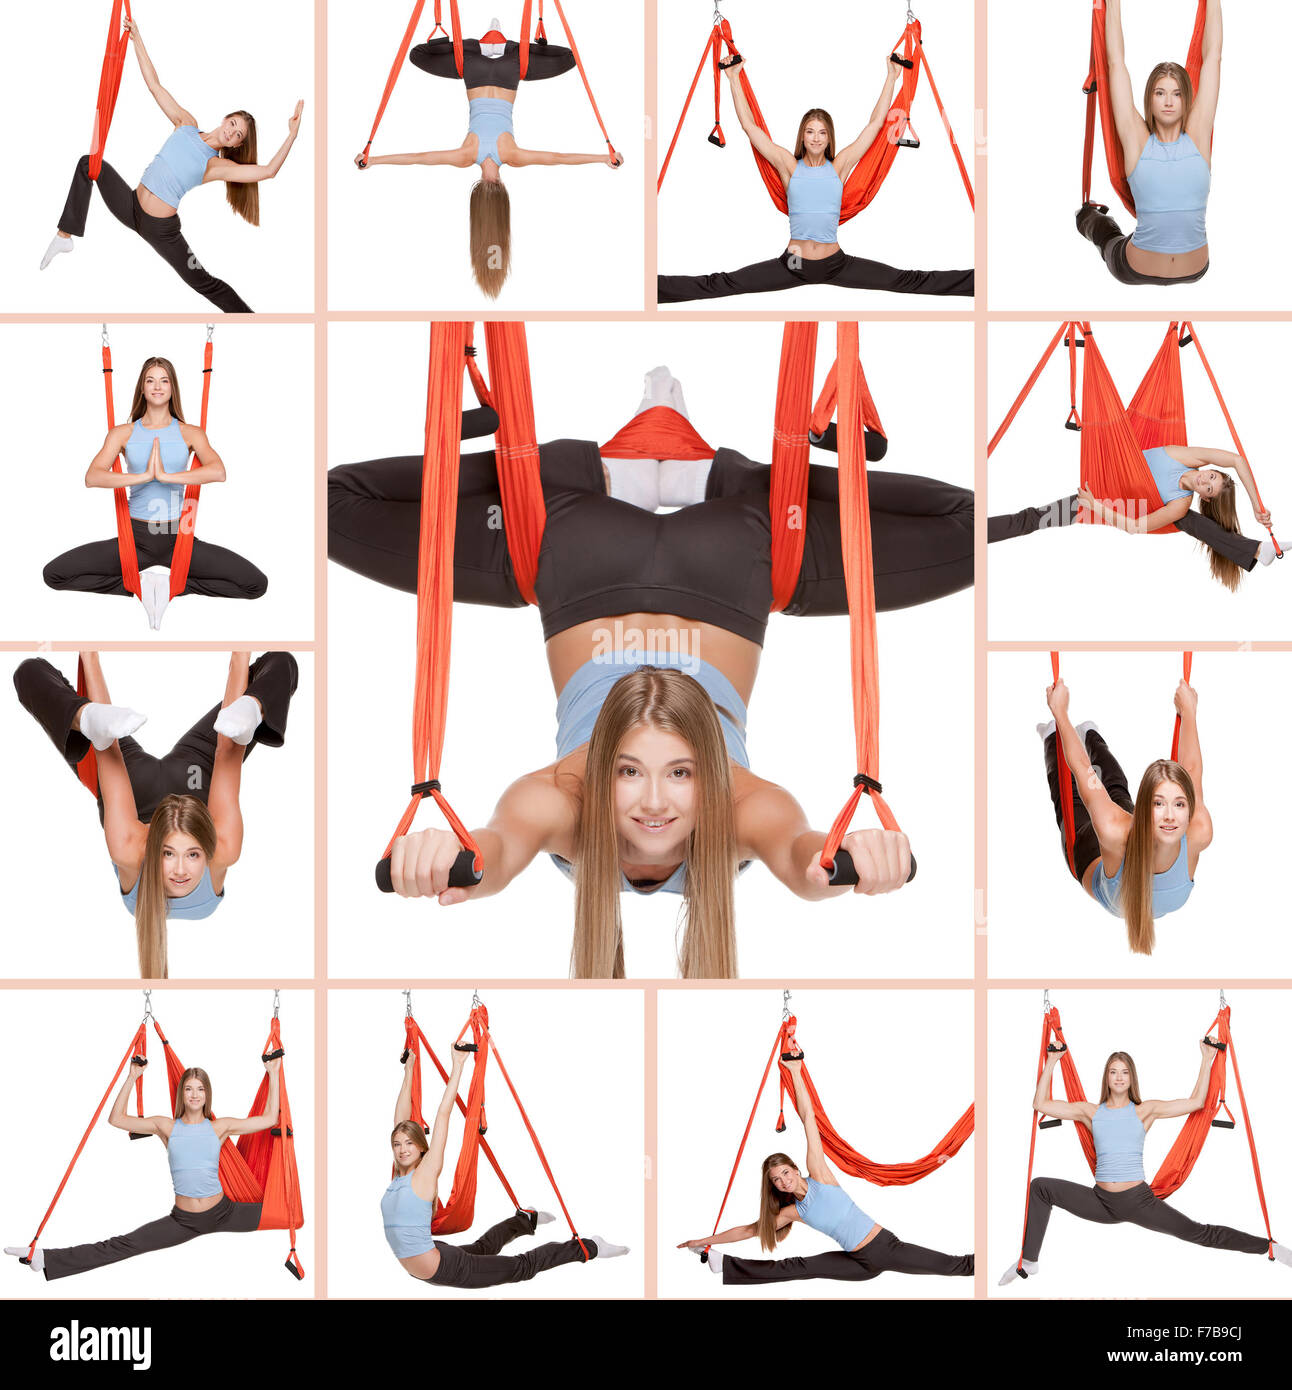 Woman Performance Performing Aerial Yoga Exercise Poses Positions Hammock  Training Indoor Gym Acrobat Digital Download Icons PNG SVG Vector - Etsy | Aerial  yoga poses, Yoga swing poses, Yoga swing